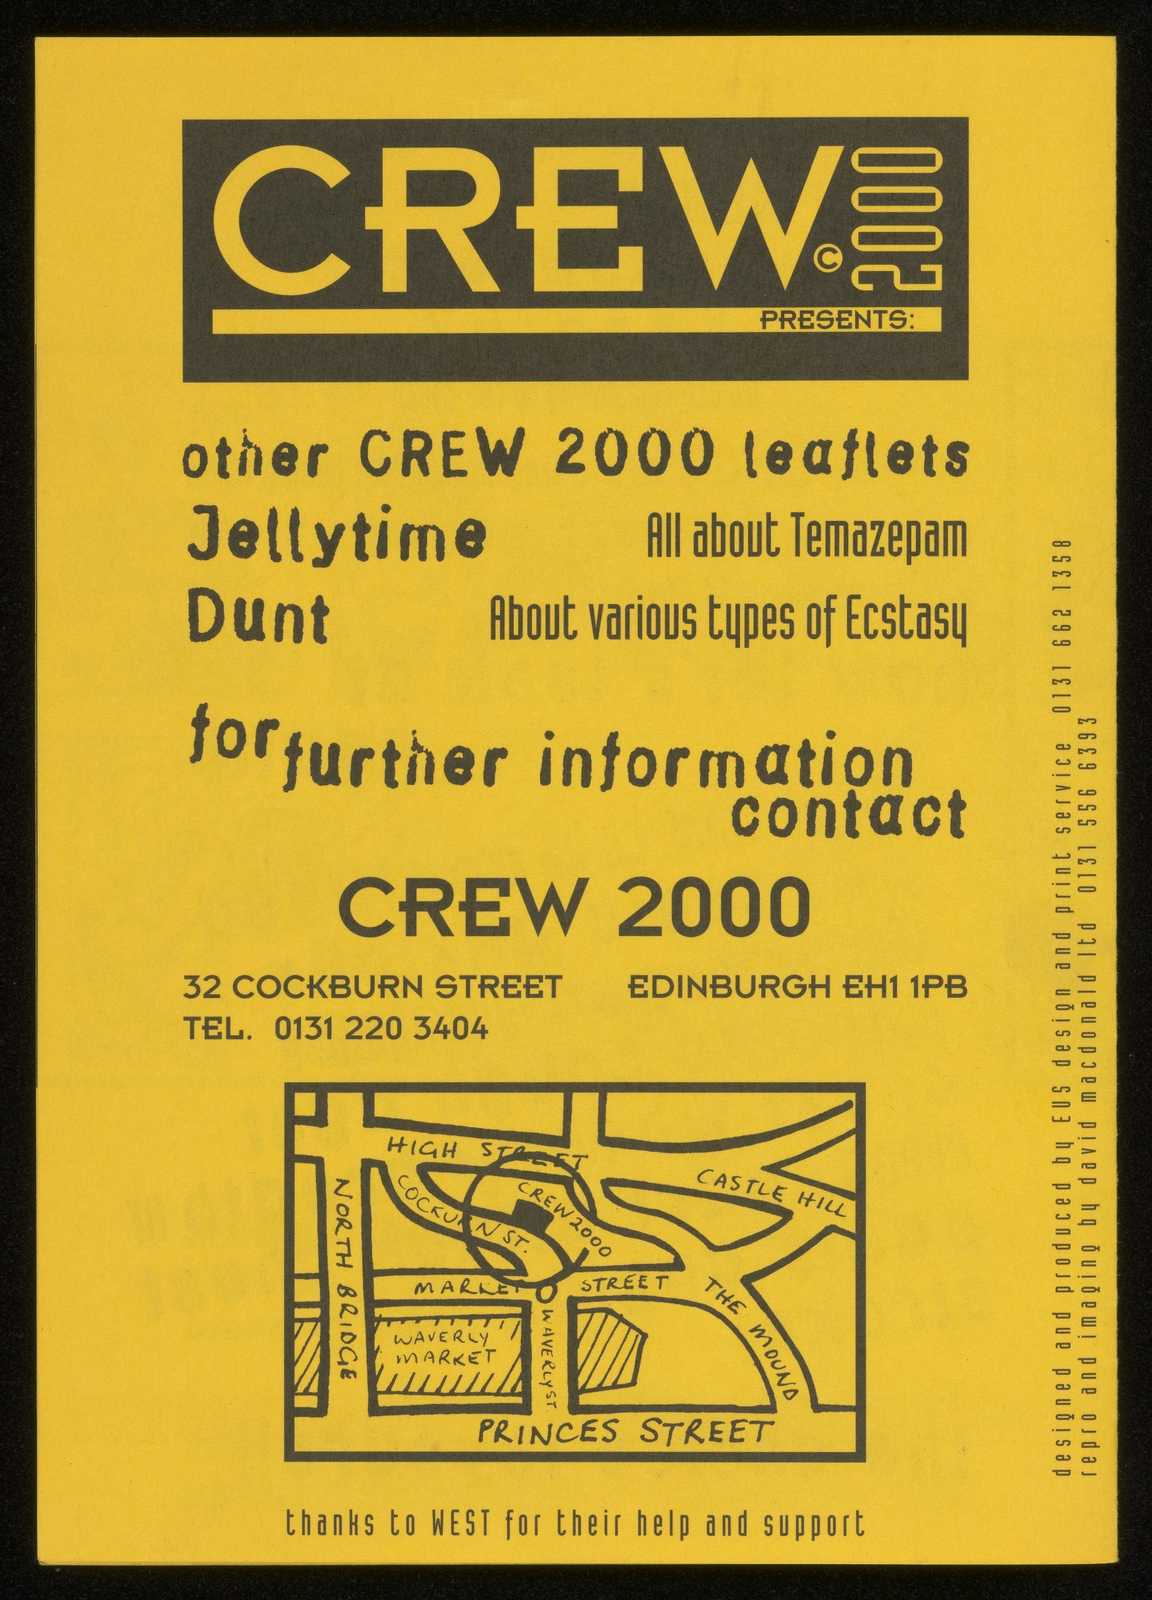 Crew 2000 poster promoting other publications about drugs; black text and map on bright yellow paper.